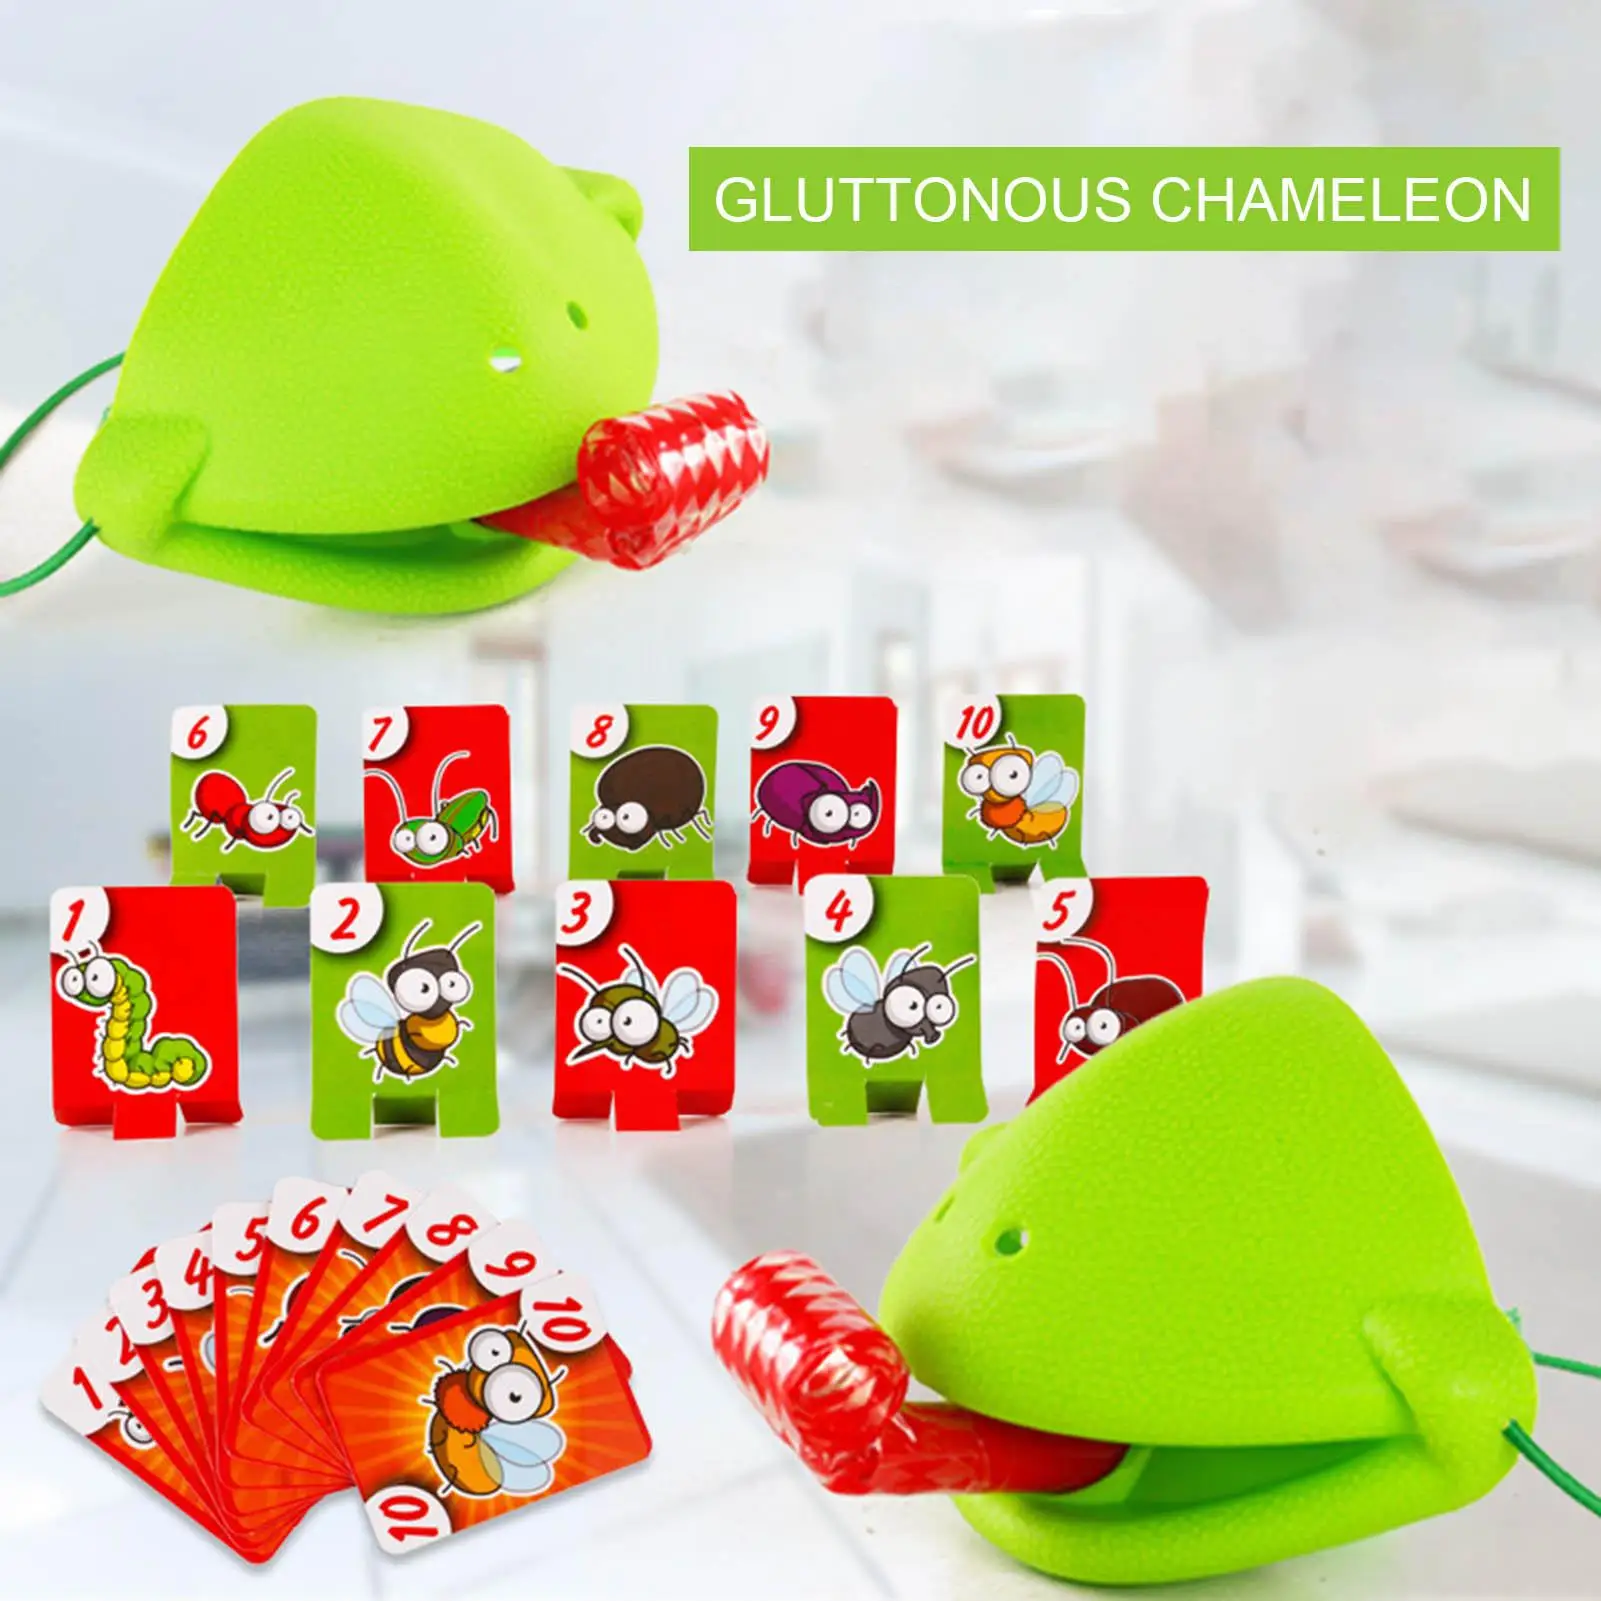 Chameleon Mouth Cover Tongue Bug Catch Lizard Quickdraw Card Party Holida.l8